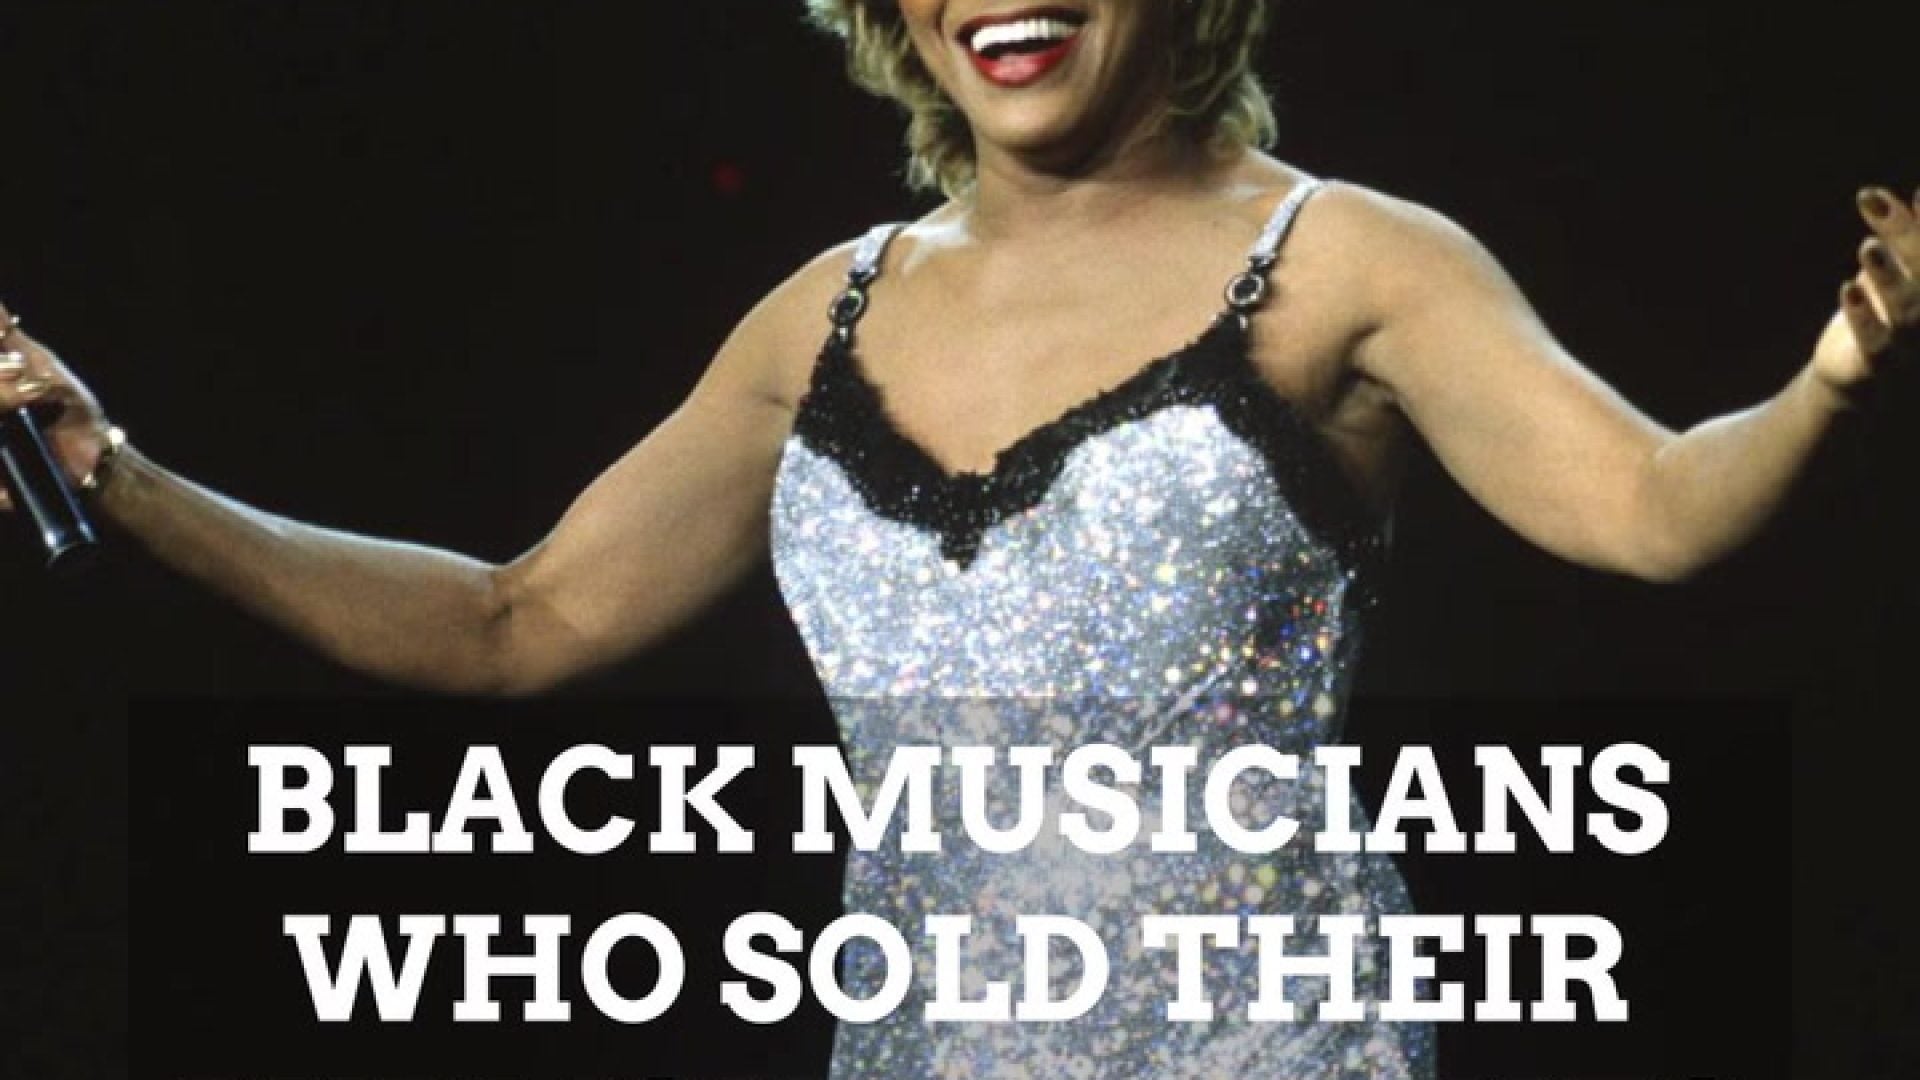 In My Feed | Black Musicians Who Sold Their Publishing Rights